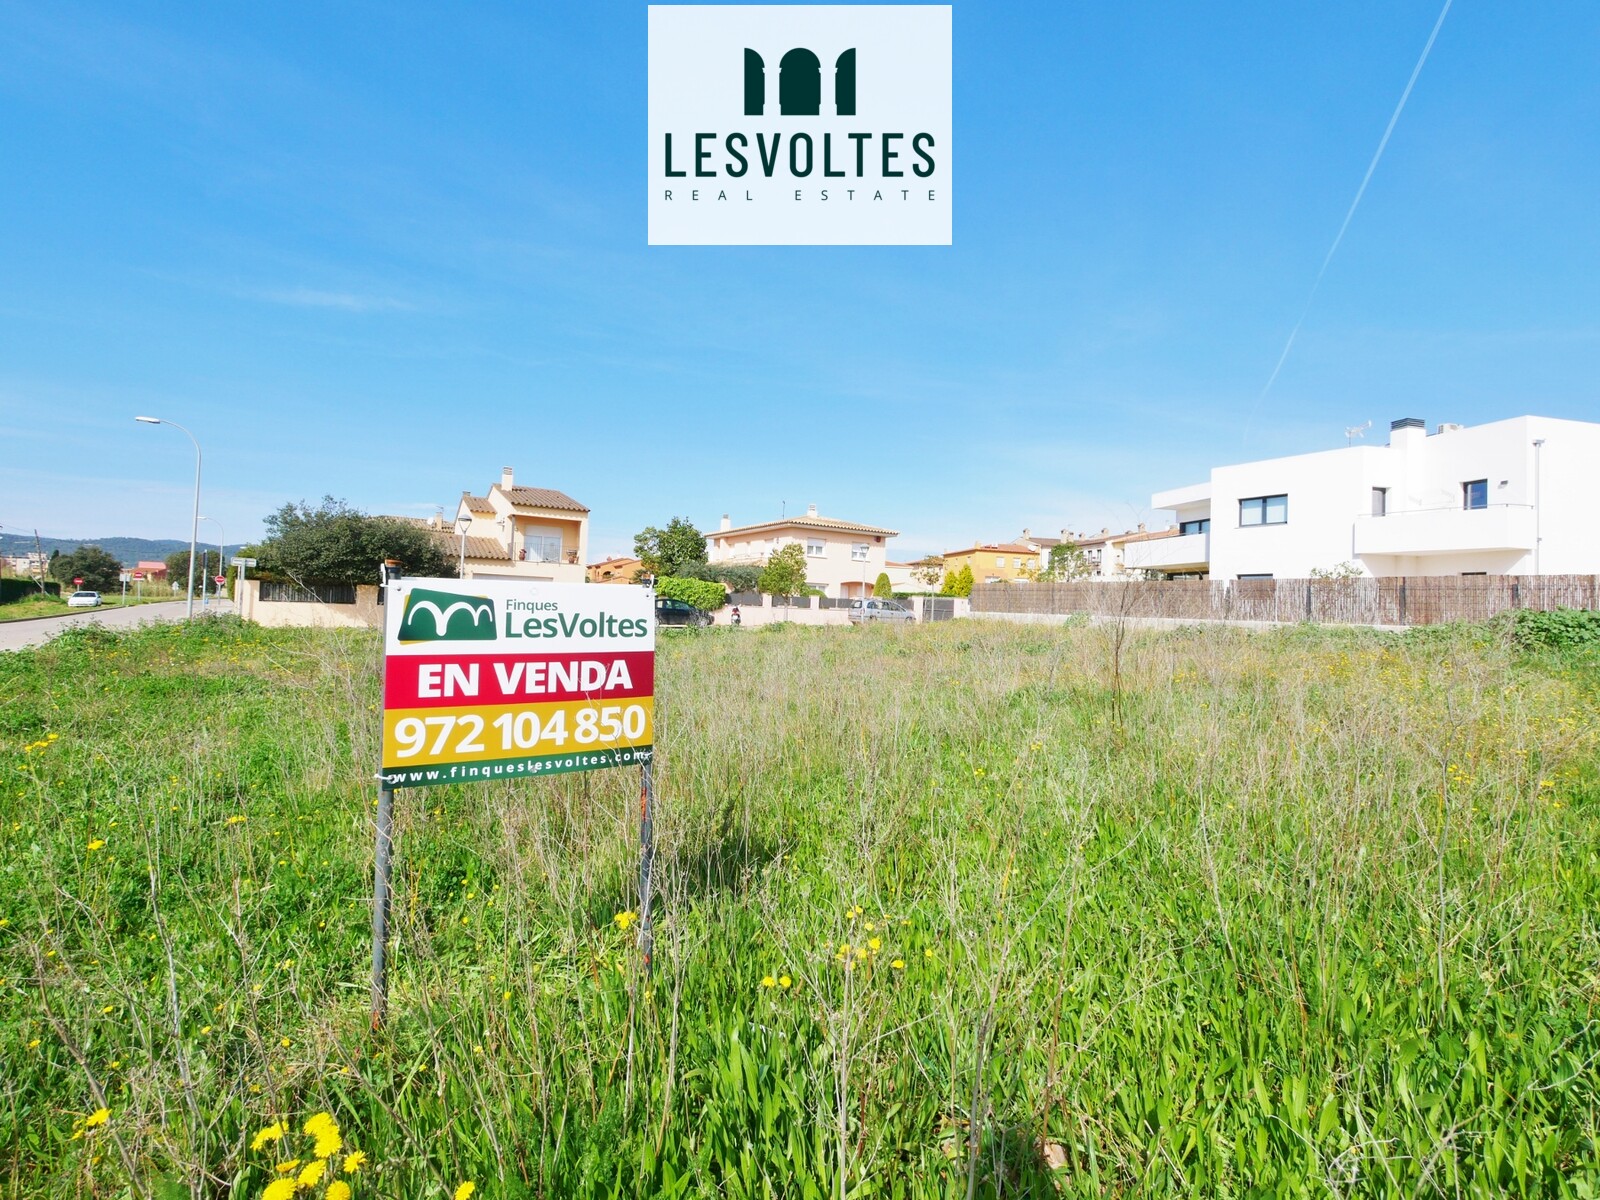 PLOTS FROM 450m2 FOR SALE IN PALAFRUGELL. BRUGUEROL AREA